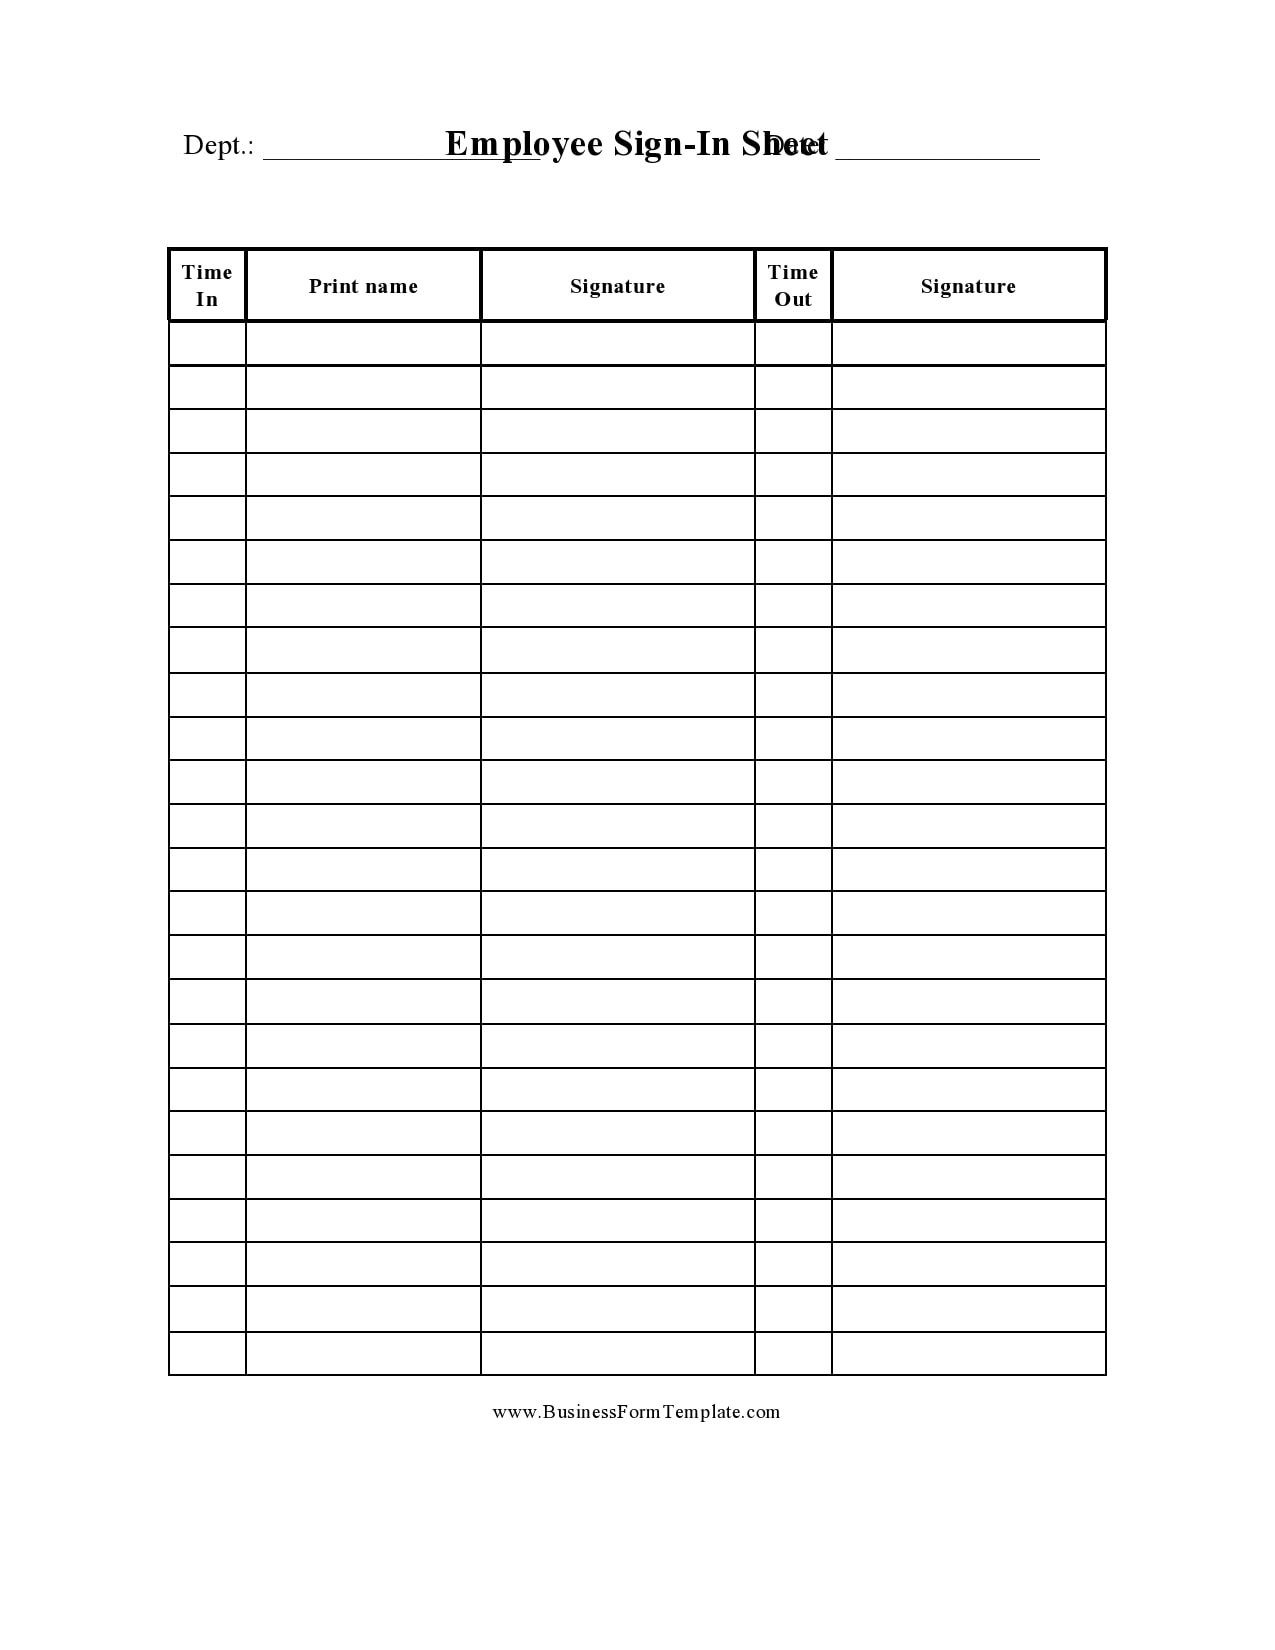 30 Printable Sign In & Sign Out Sheets (Best Templates!)